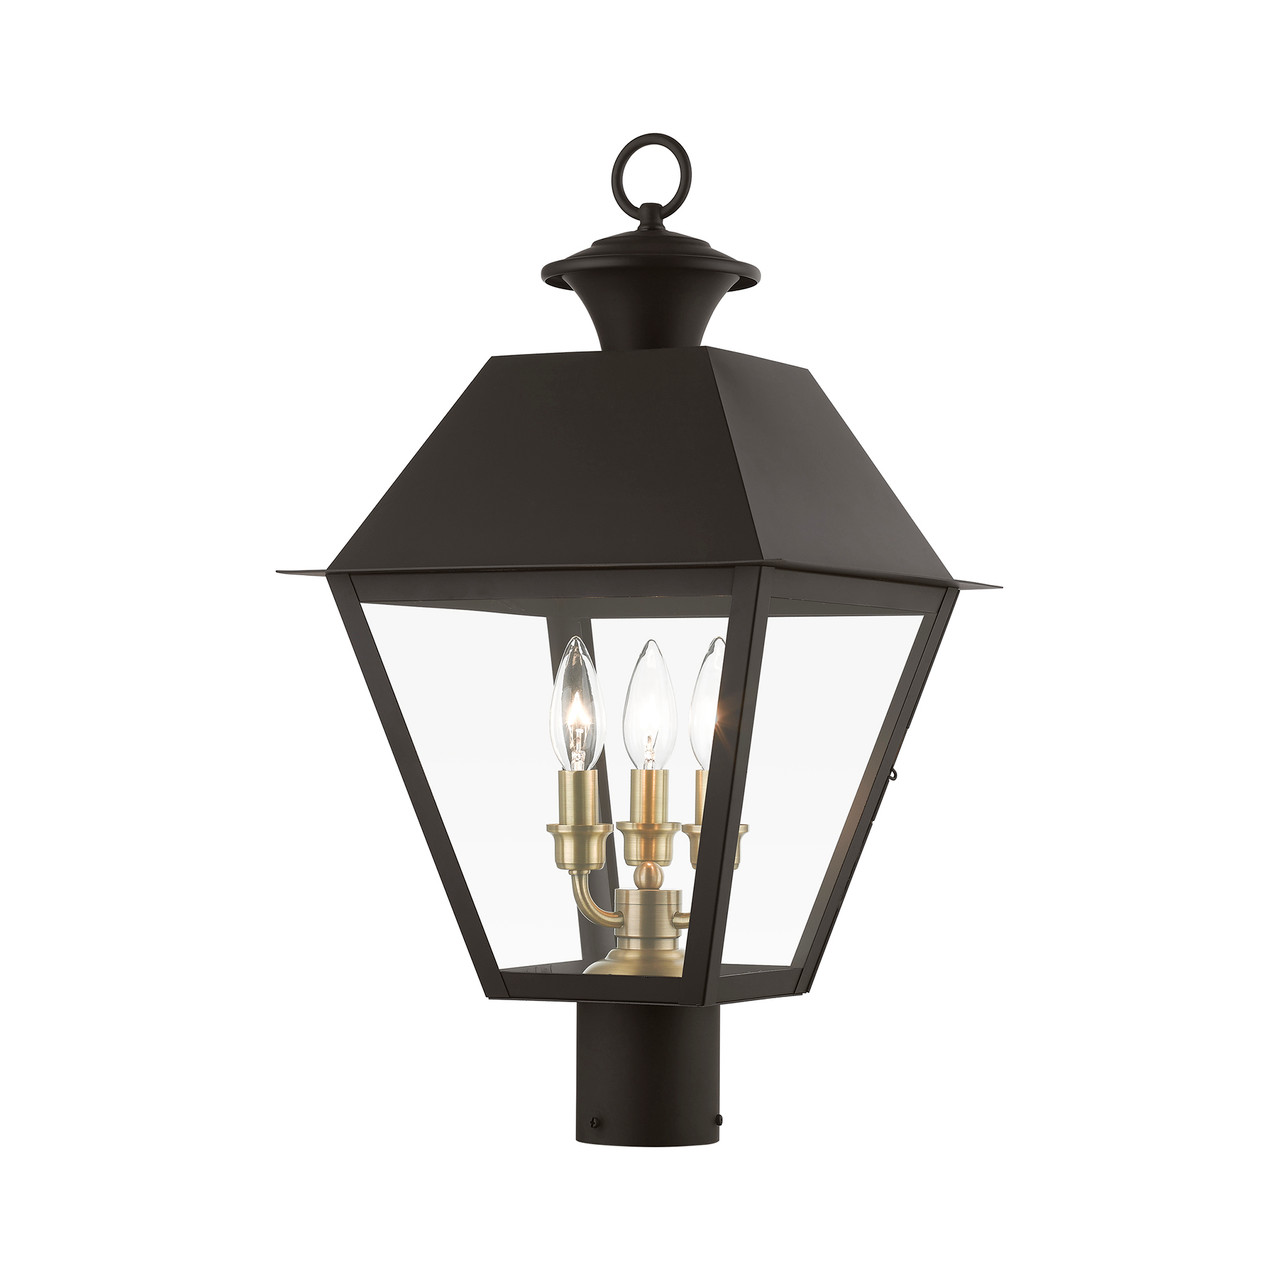 LIVEX LIGHTING 27219-07 3 Light Bronze with Antique Brass Finish Cluster Outdoor Large Post Top Lantern